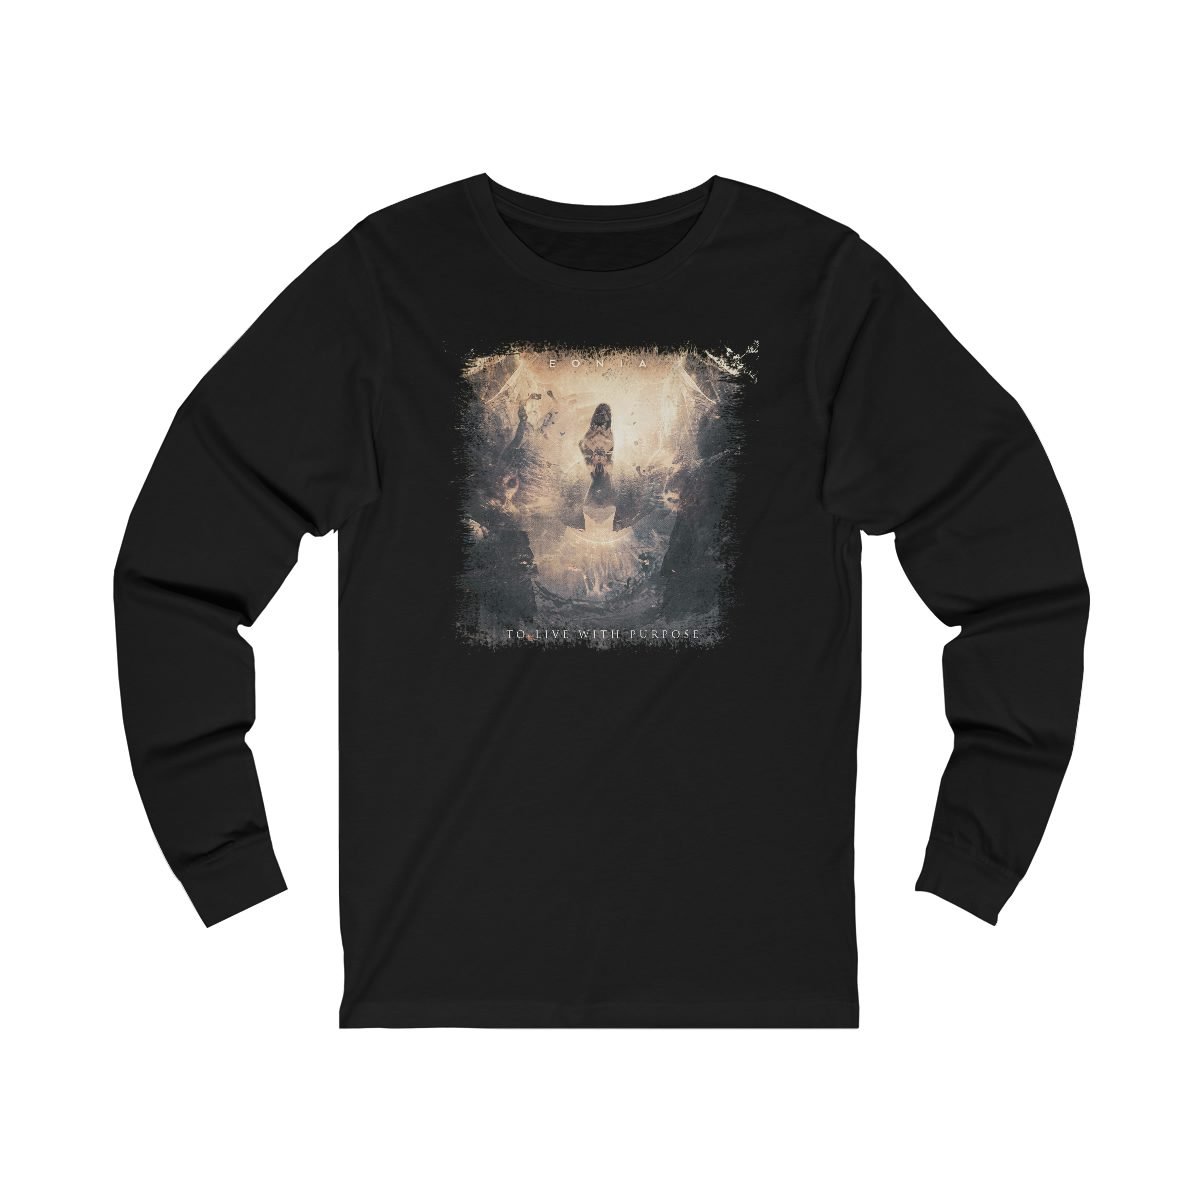 Eonia – To Live With Purpose (The Charon Collective) Long Sleeve Tshirt